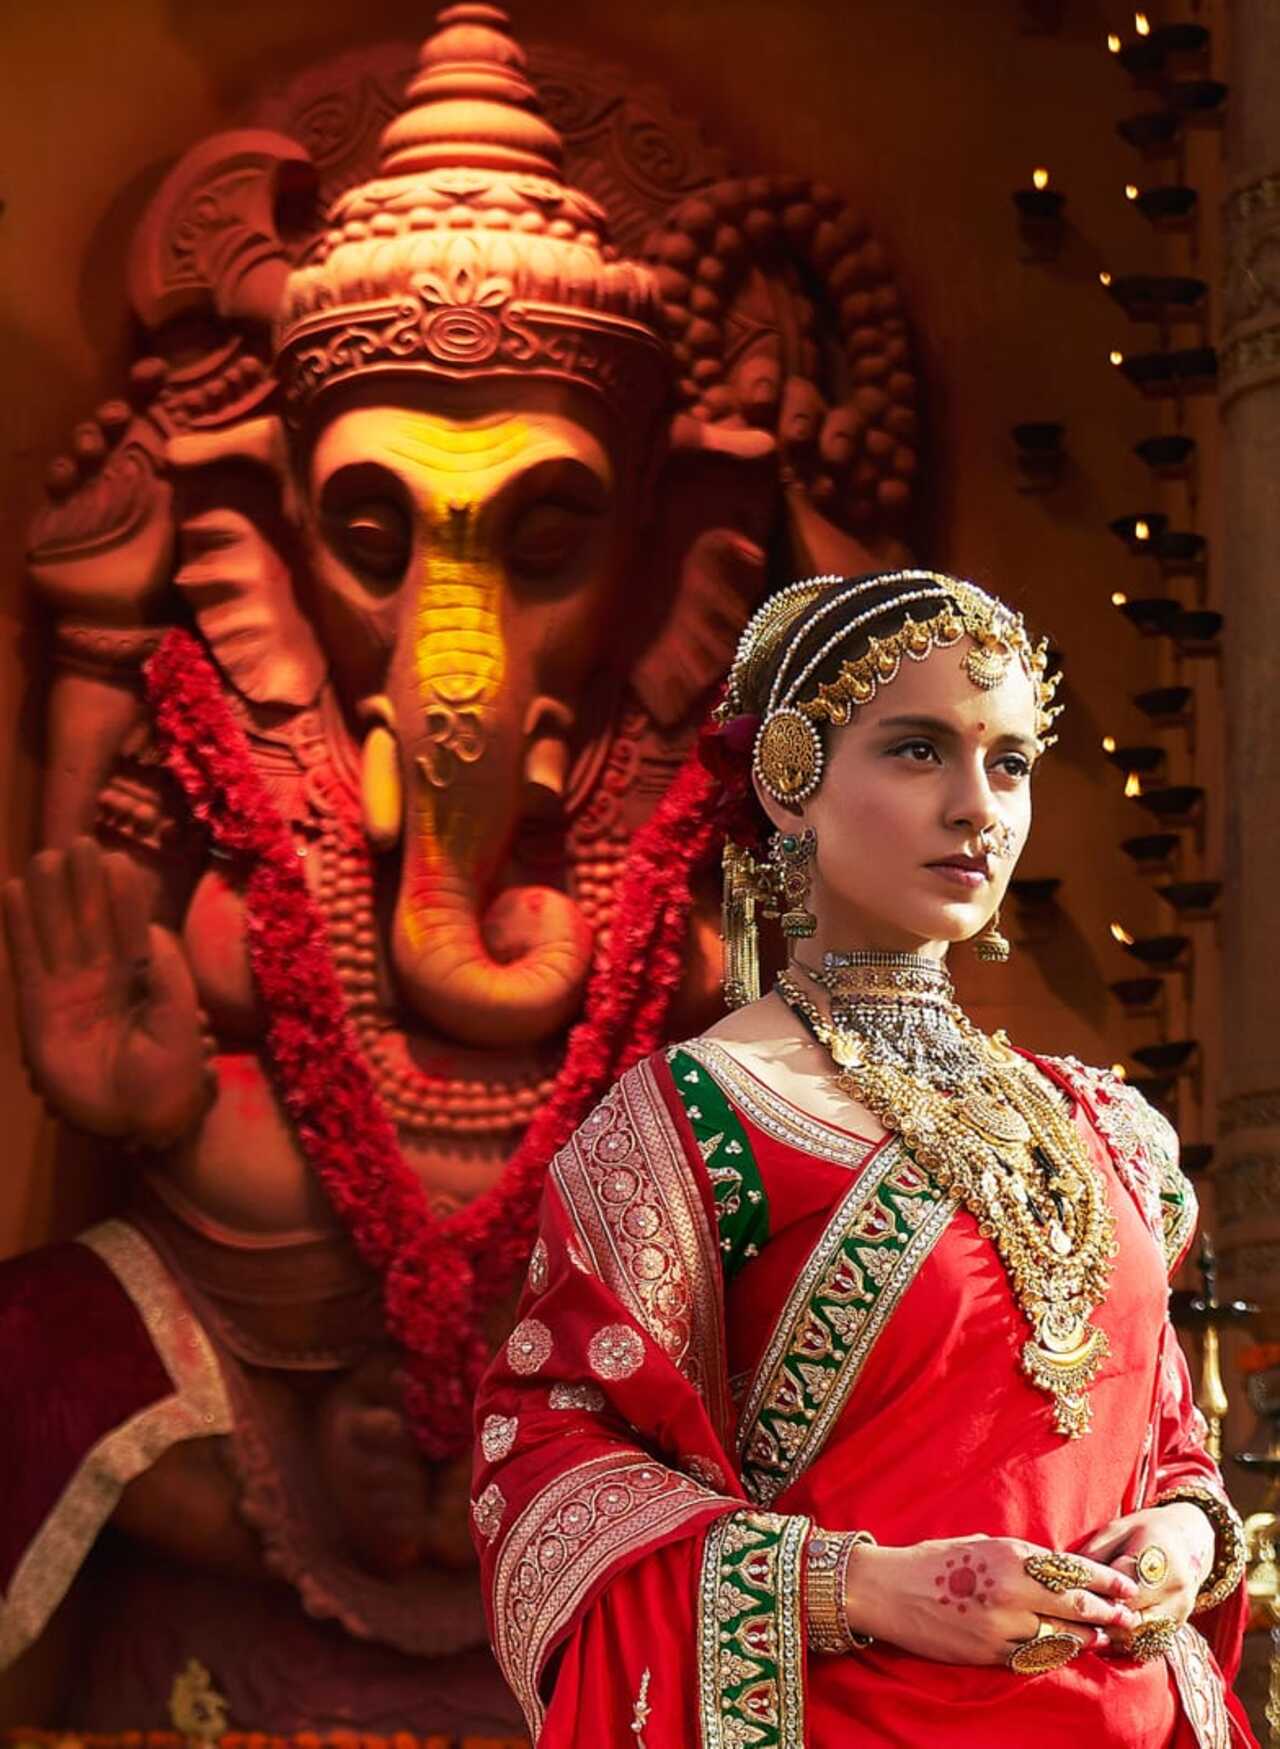 Kangana Ranaut’s 'Manikarnika: The Queen of Jhansi' depicts the life of Rani Lakshmi Bai, the queen of Jhansi, who played a crucial role in the Indian Rebellion of 1857 against British rule